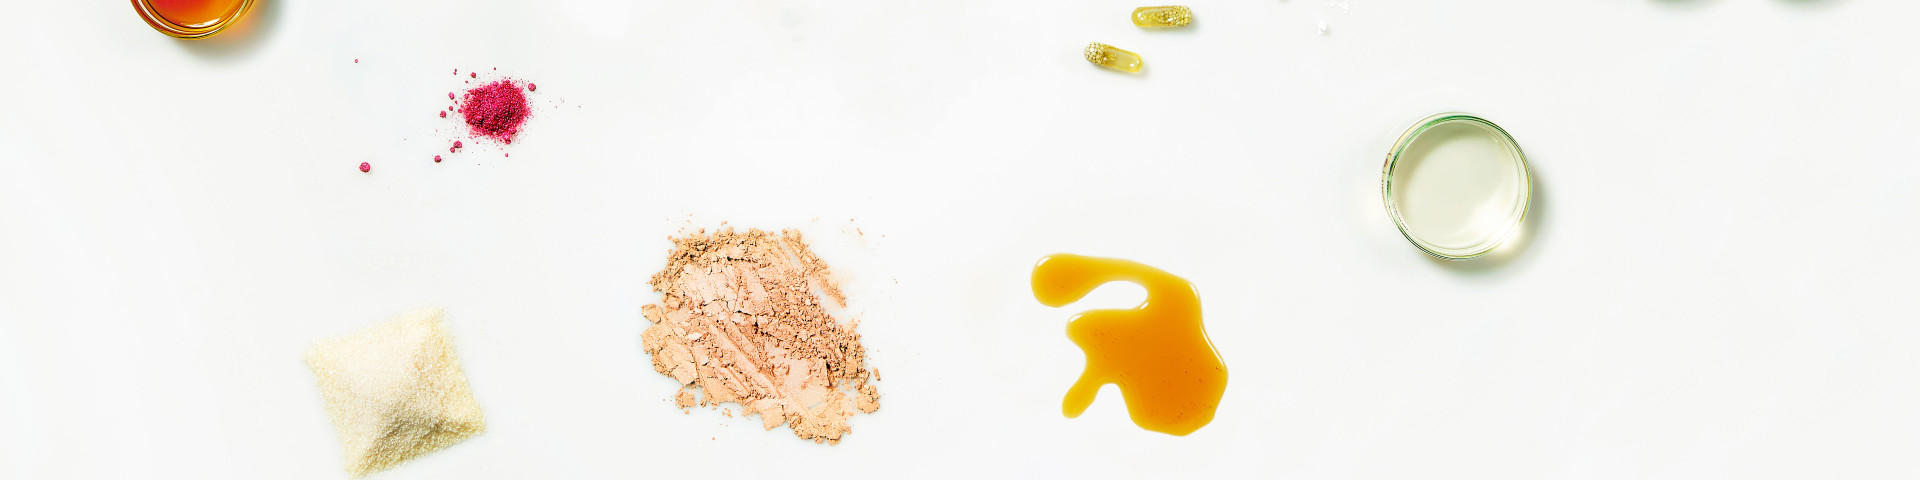 Curious about the difference between vitamins and minerals? Let's dig into the science of it.